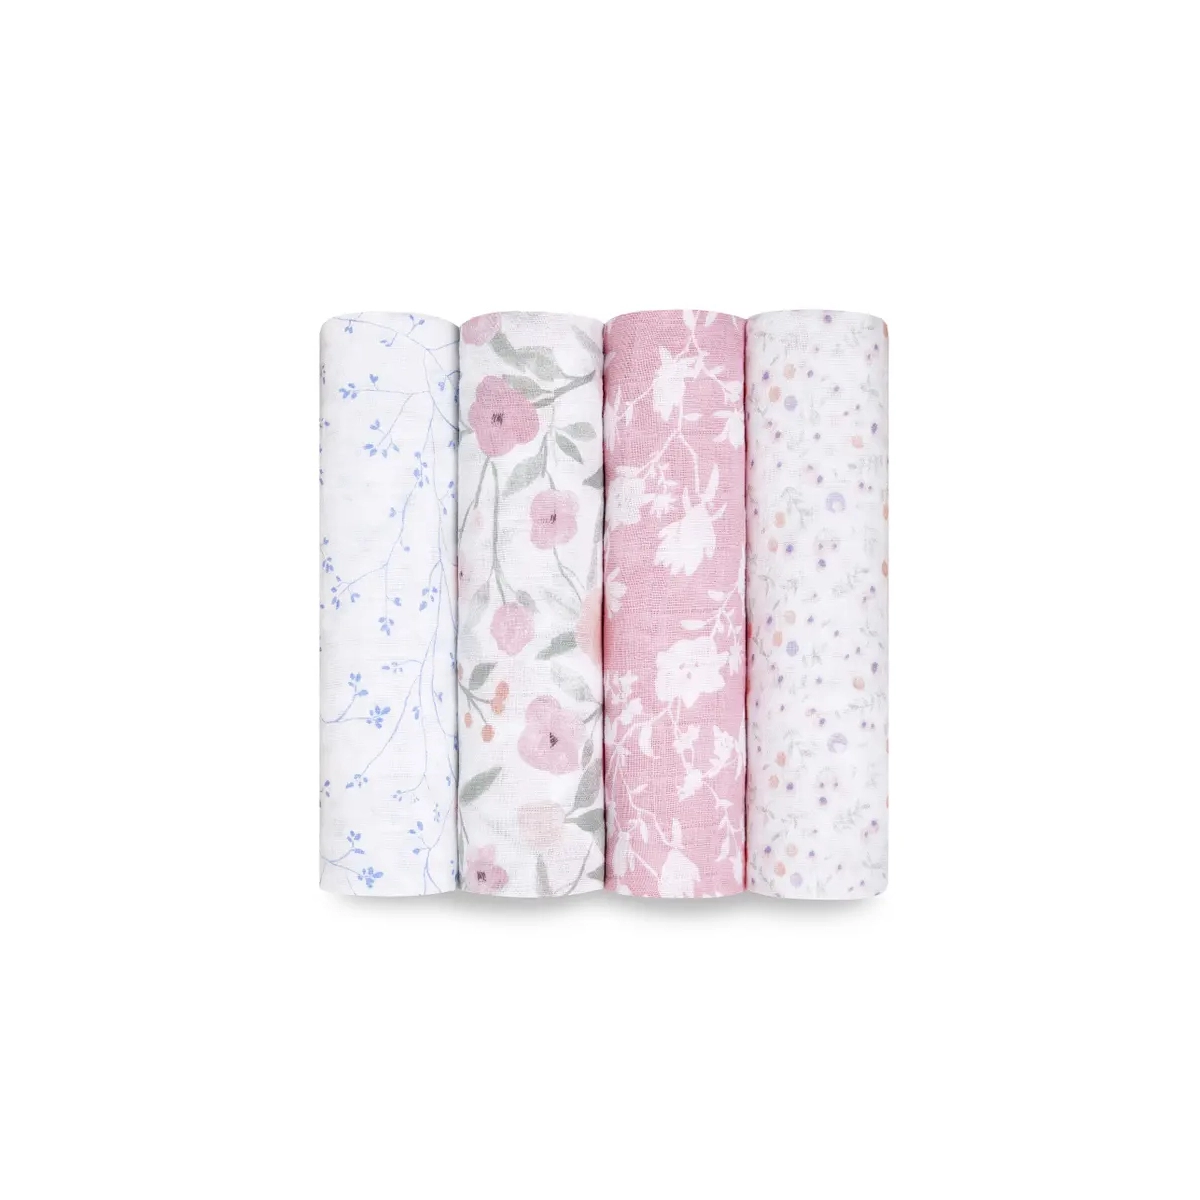 Image of Aden + Anais Pack of 4 Large Swaddle Cotton Muslin - Ma Fleur (23-19-040)